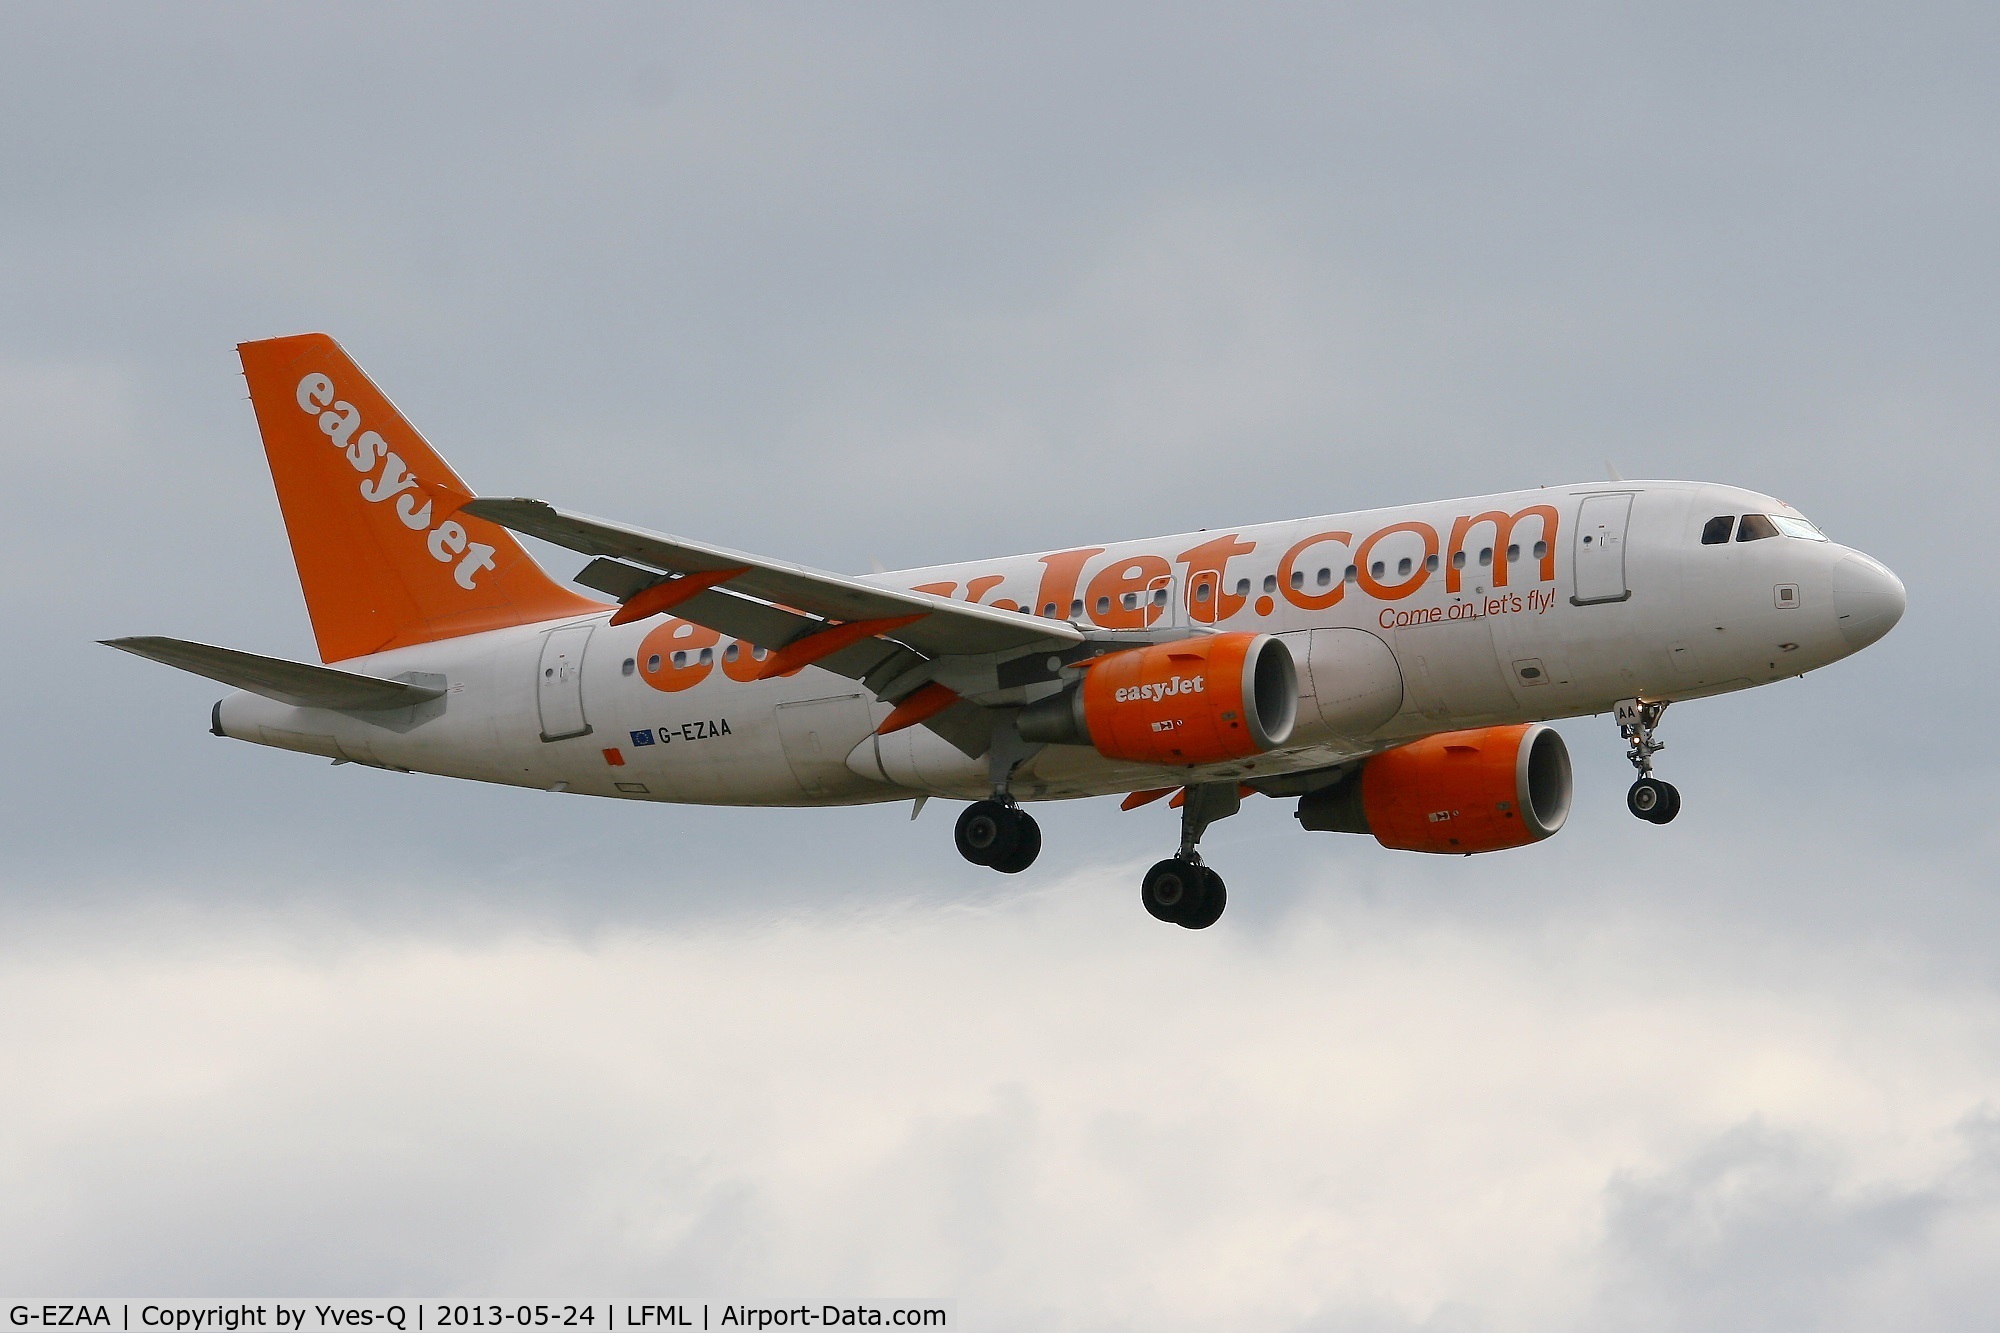 G-EZAA, 2006 Airbus A319-111 C/N 2677, Airbus A319-111, Short approach rwy 31L, Marseille-Provence Airport (LFML-MRS)